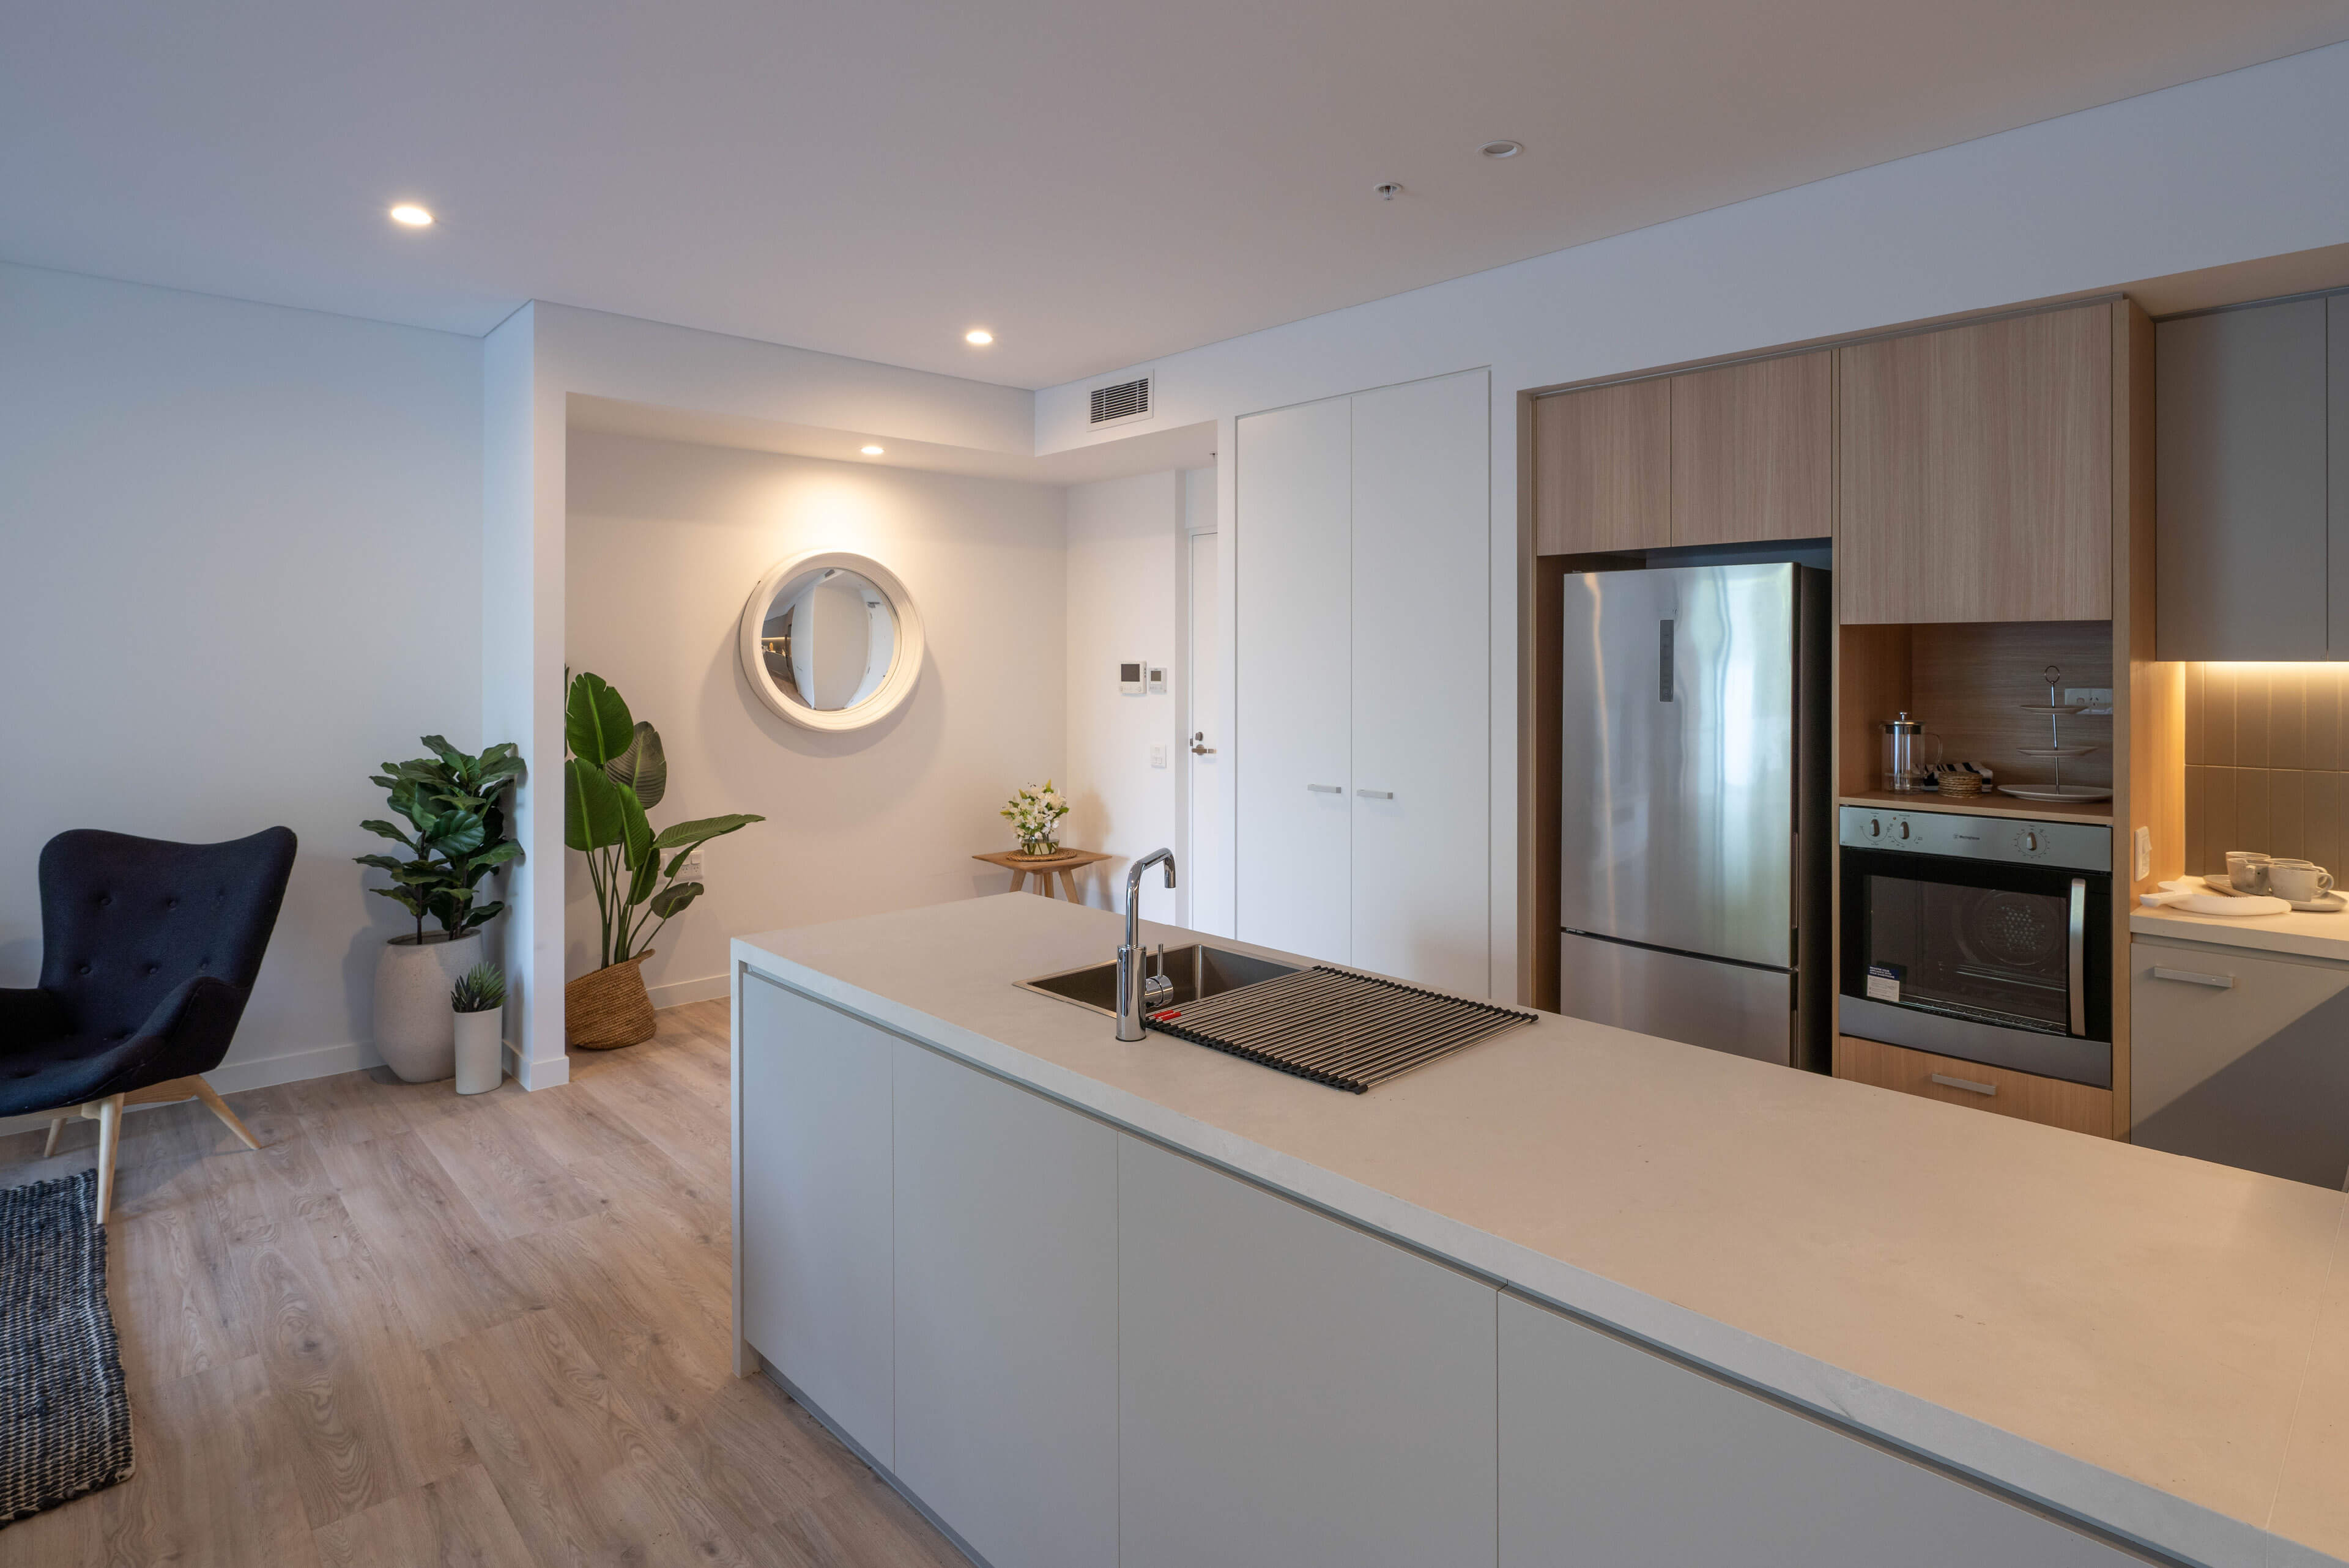 22 interior kitchen independent living unit at uniting mayflower westmead taylor construction aged care